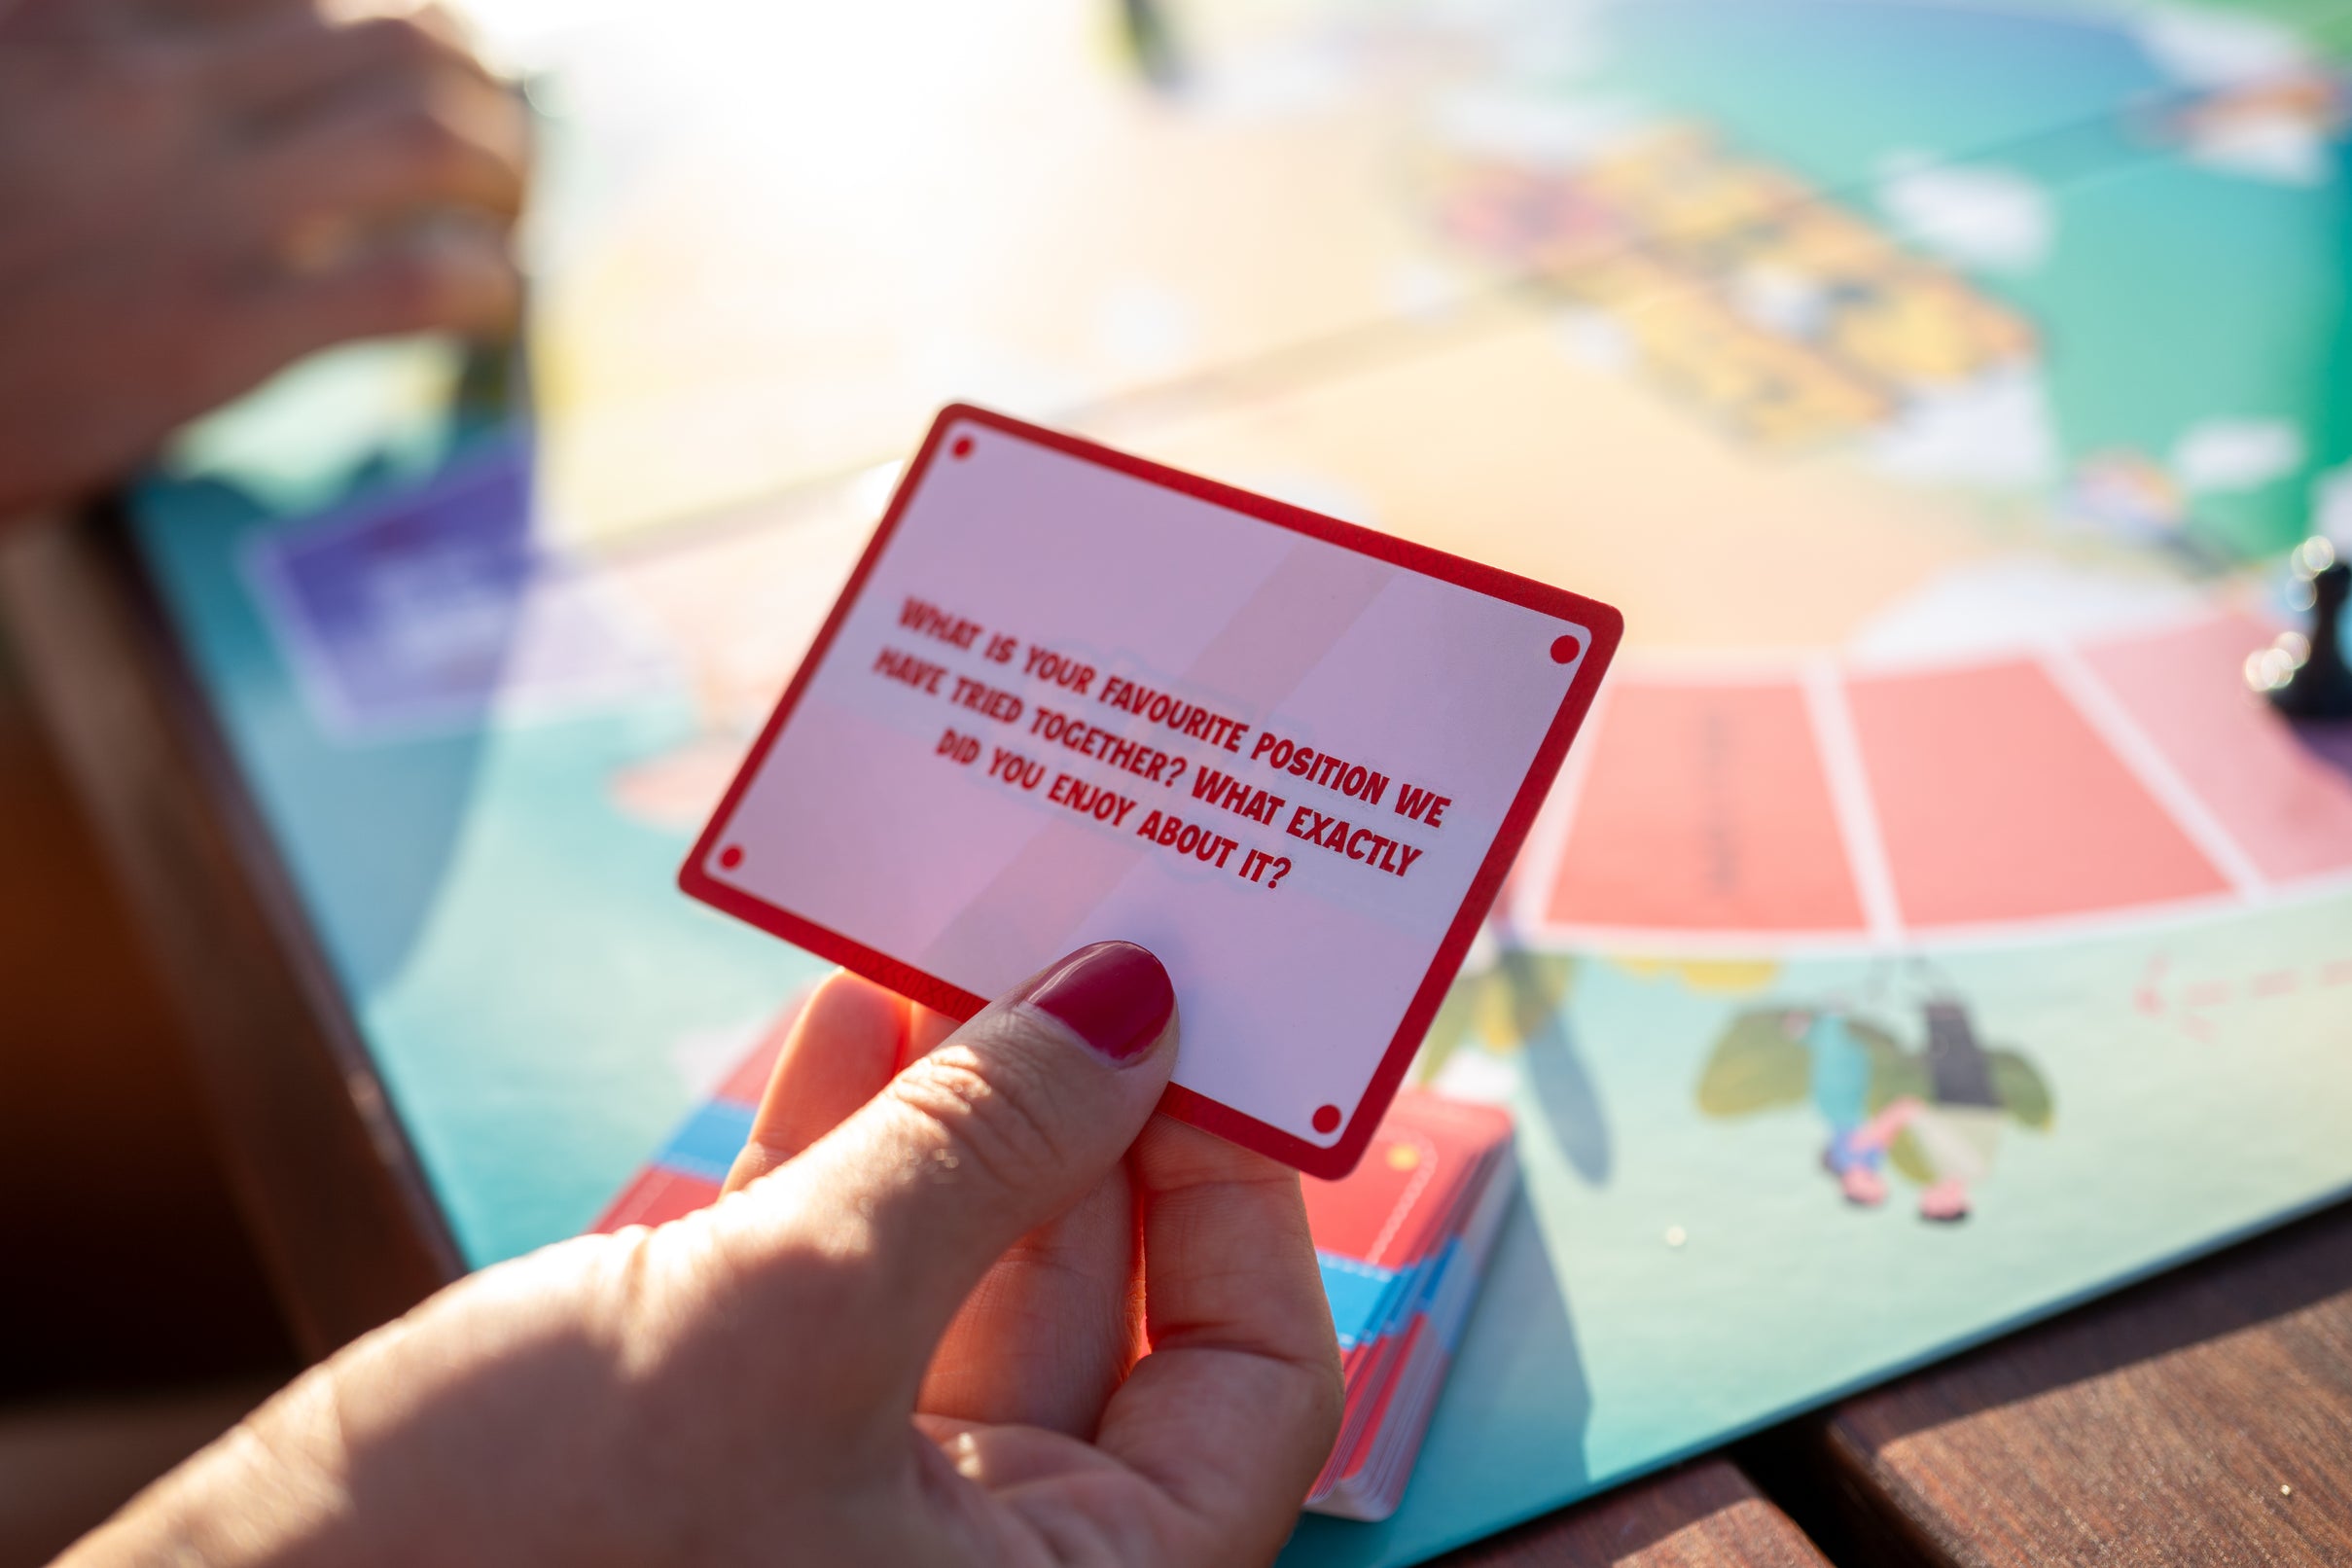 Let's Connect Couples Board Game